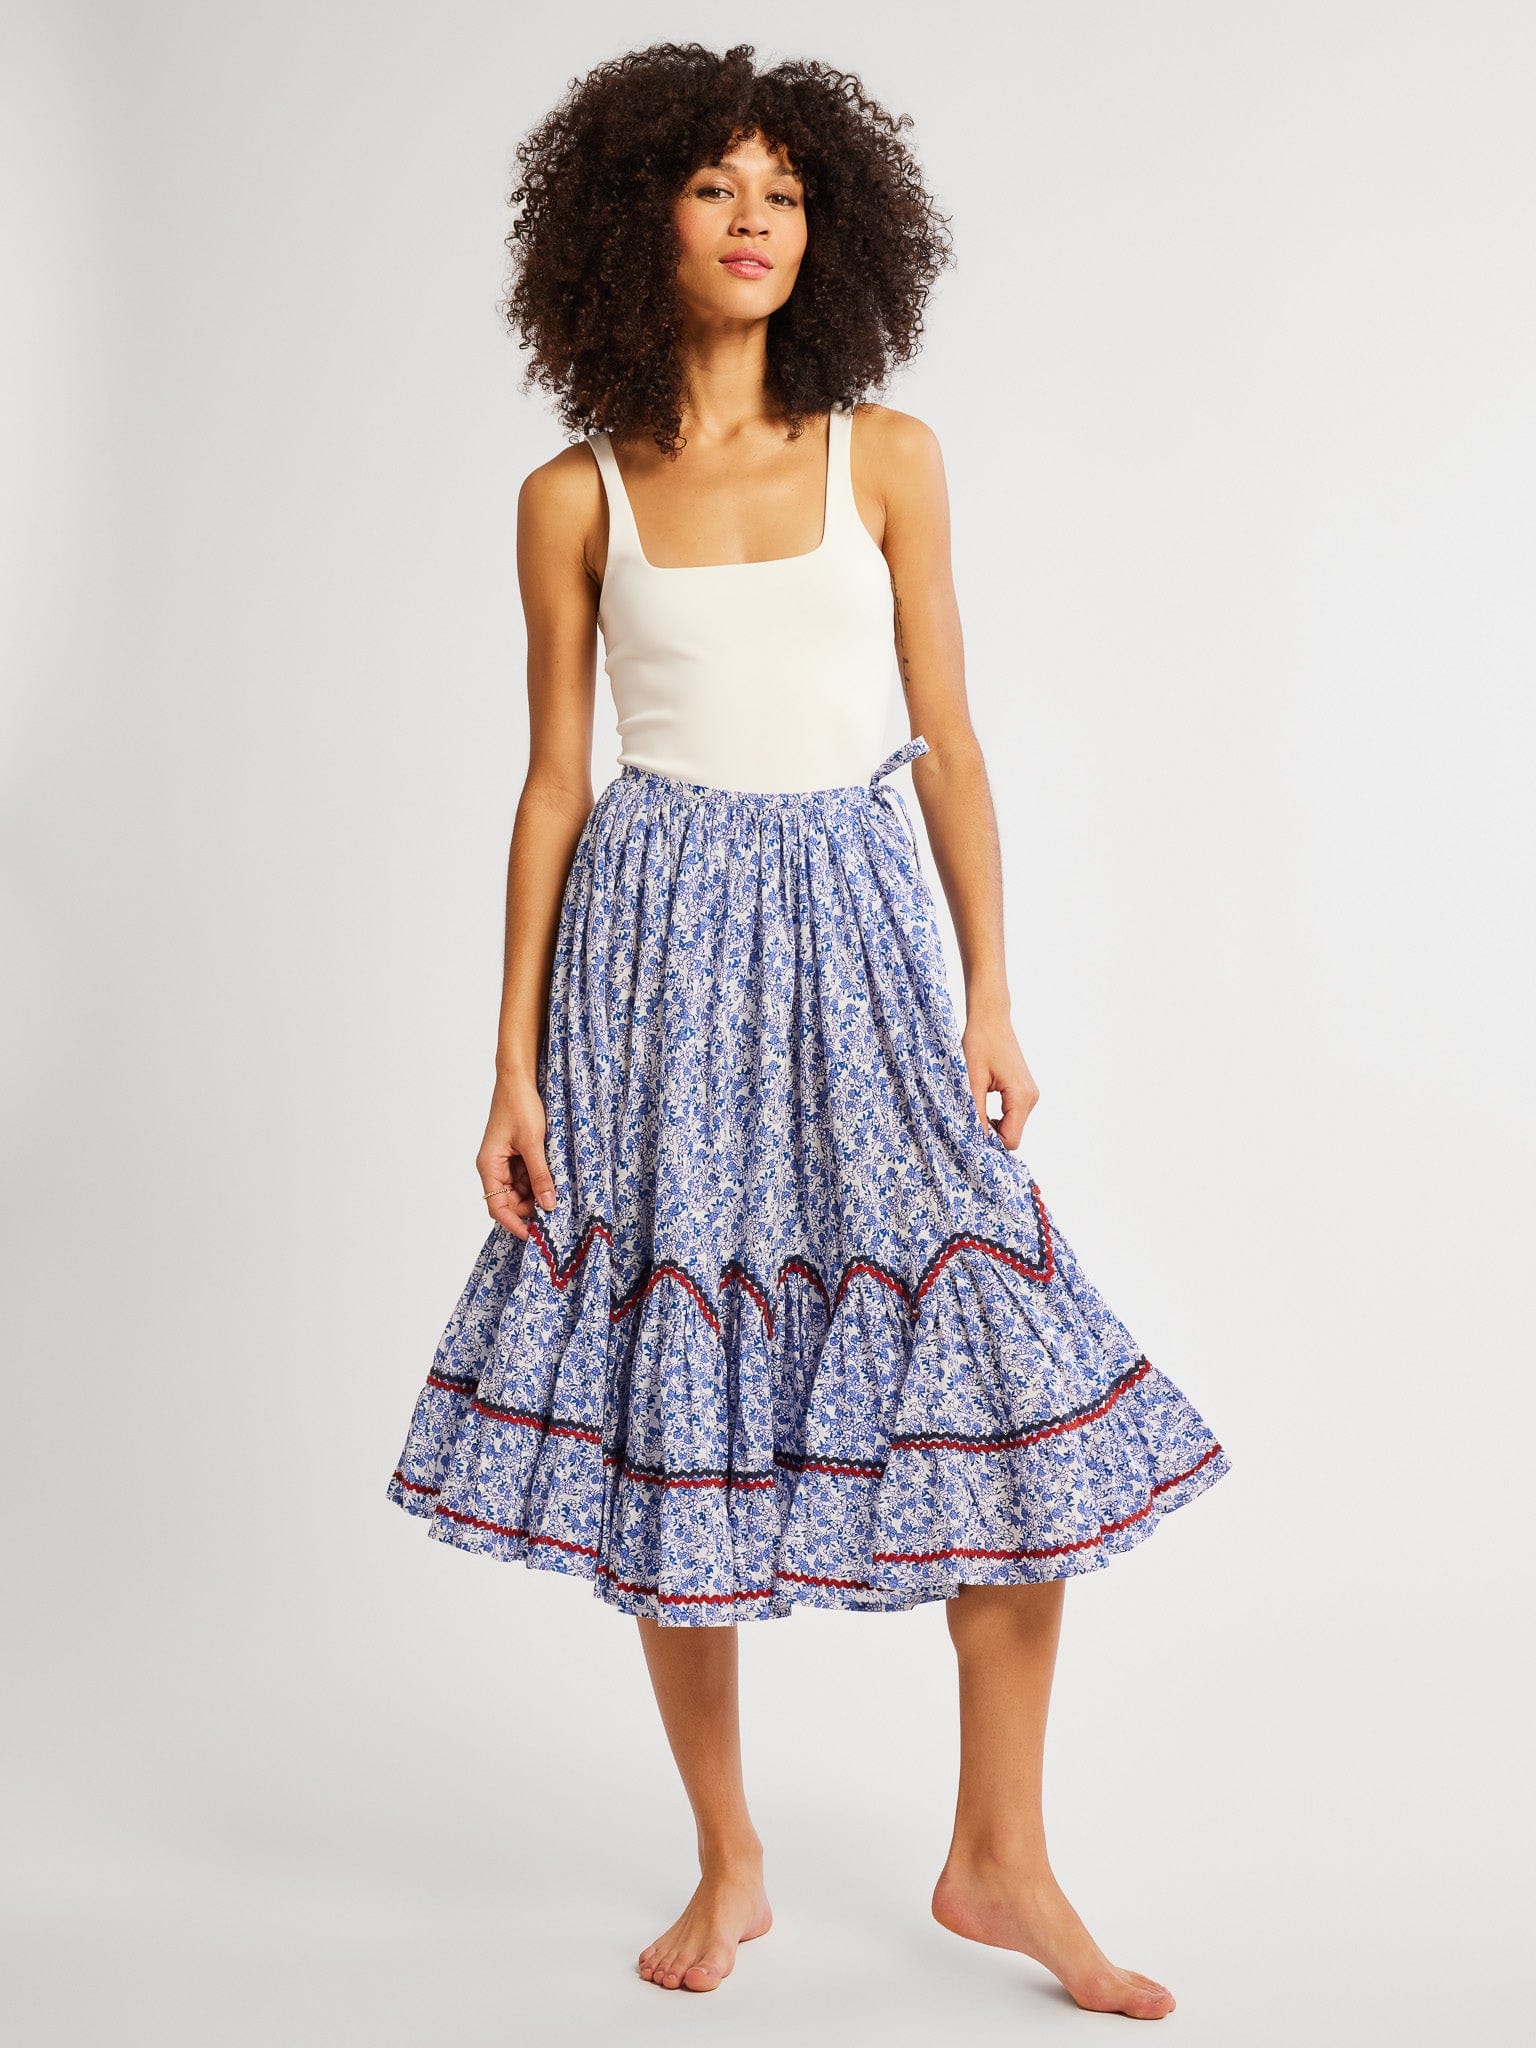 MILLE Clothing Amalie Skirt in Condesa Floral